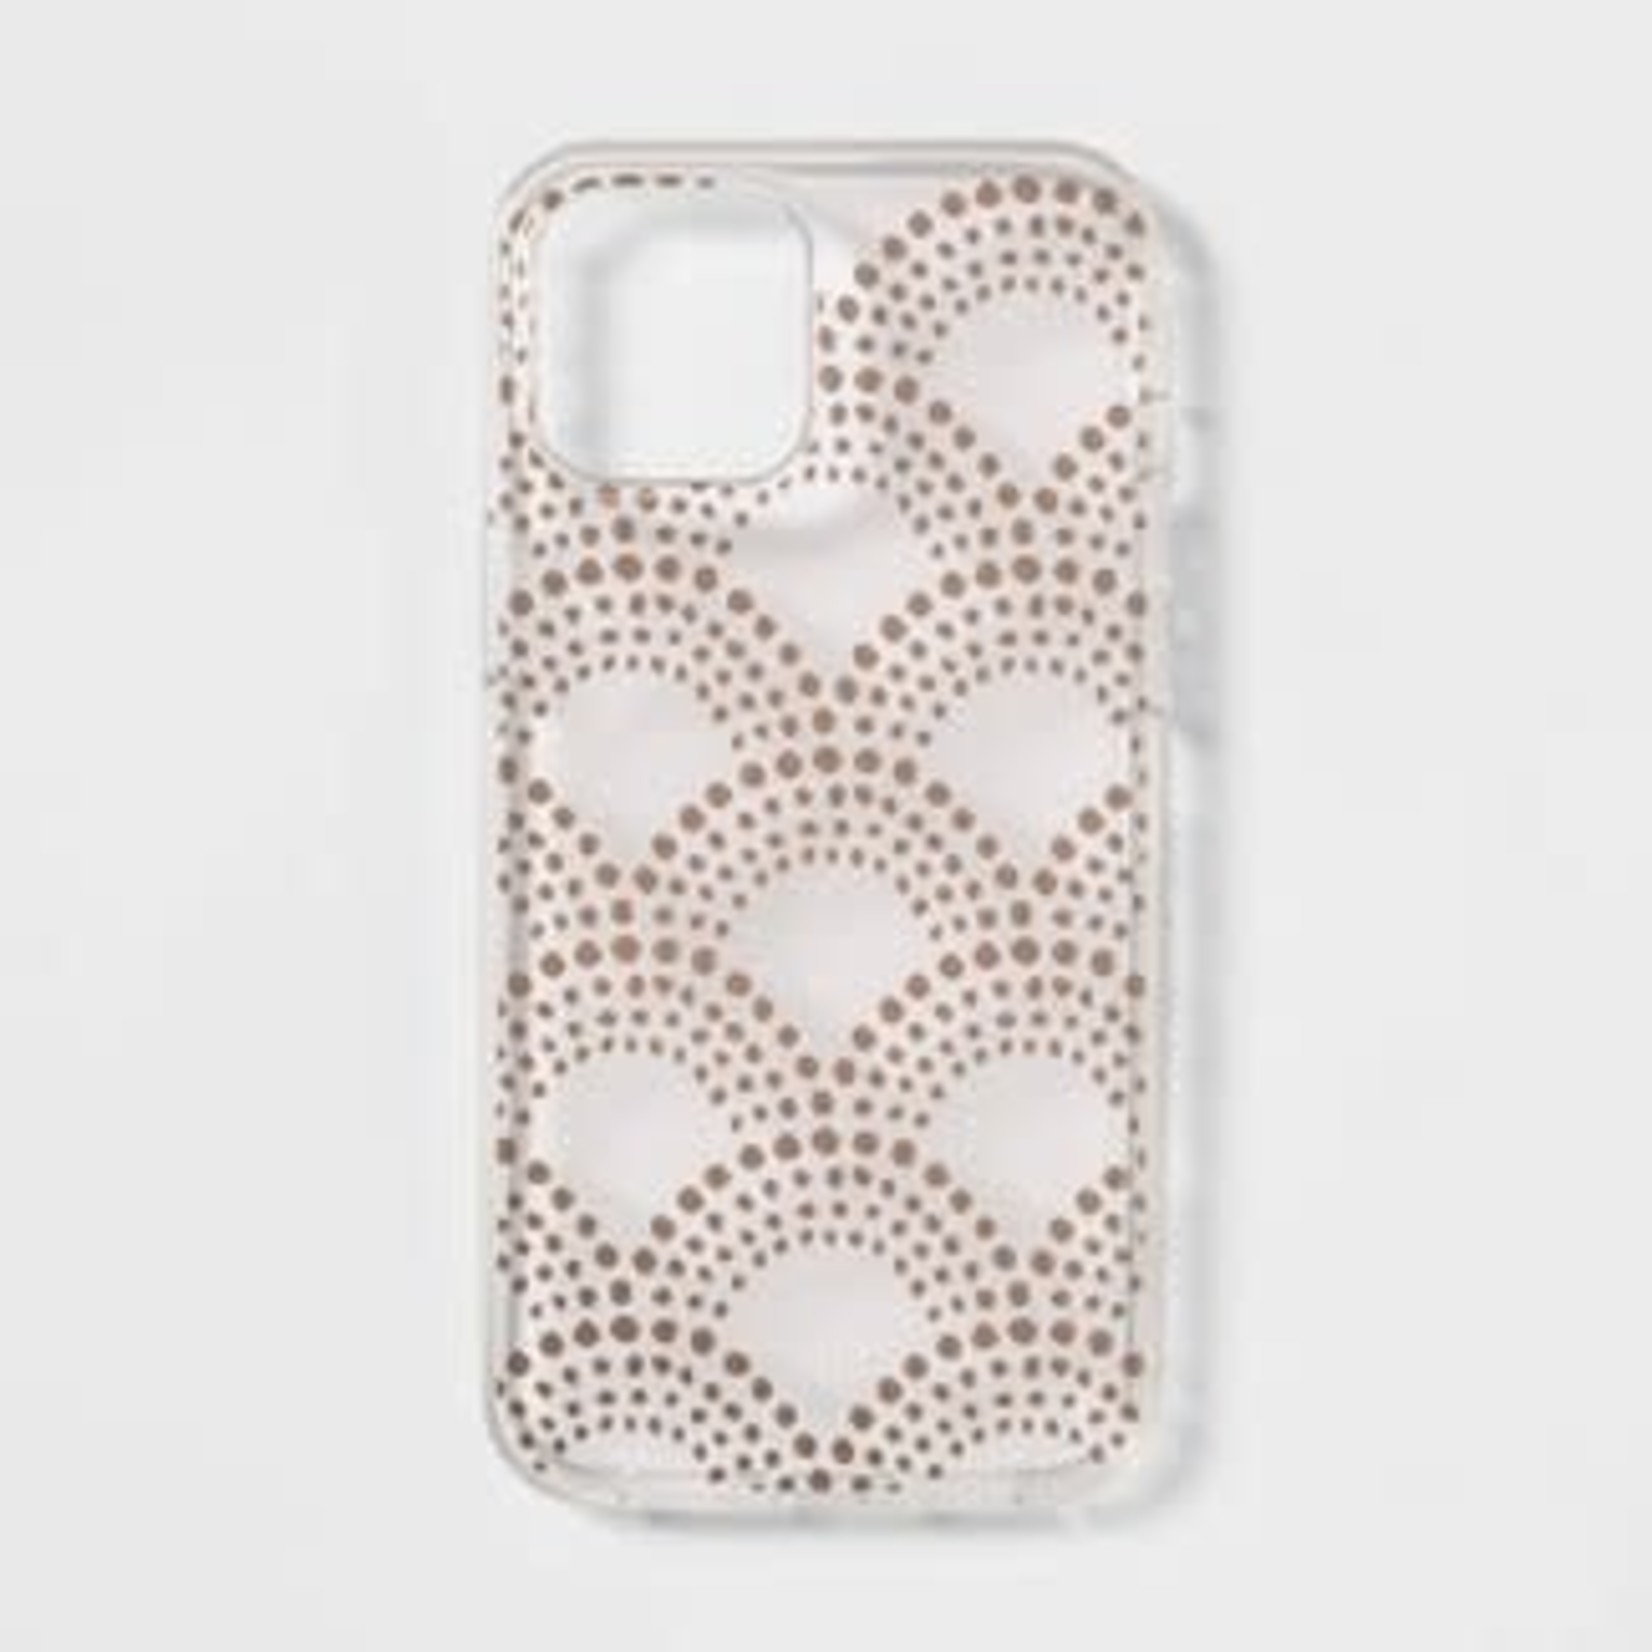 heyday Apple iPhone Case - Scallop Dot iPhone 2020 6.7"